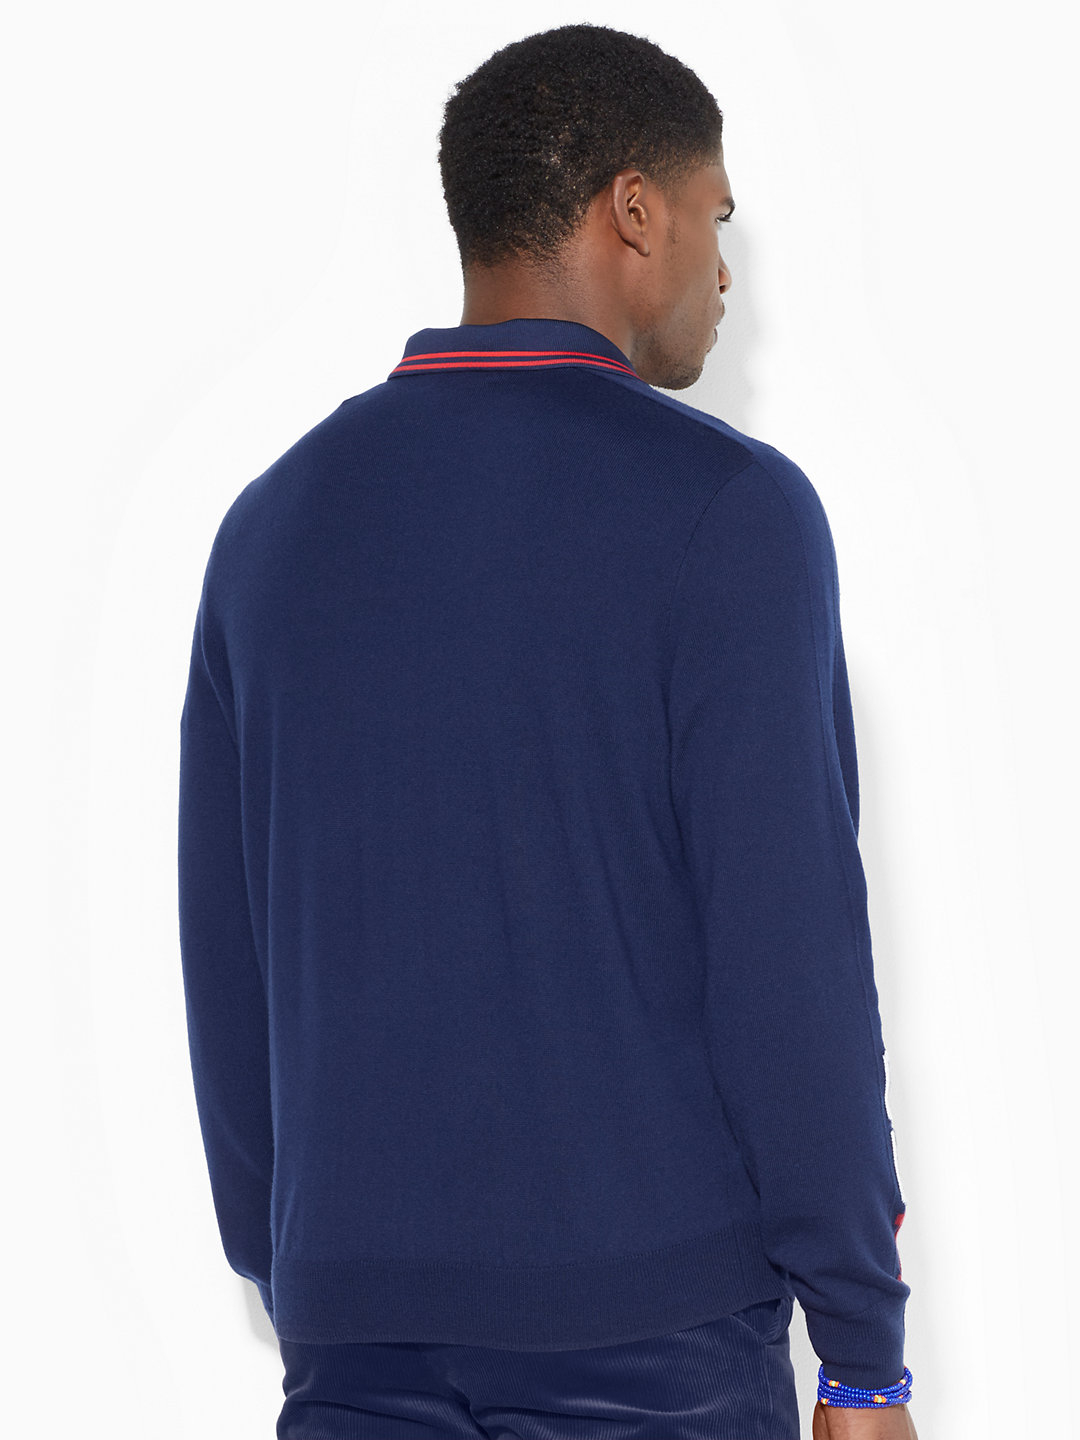 Polo Ralph Lauren Ryder Cup Flag Wool Sweater in Navy (Blue) for Men - Lyst